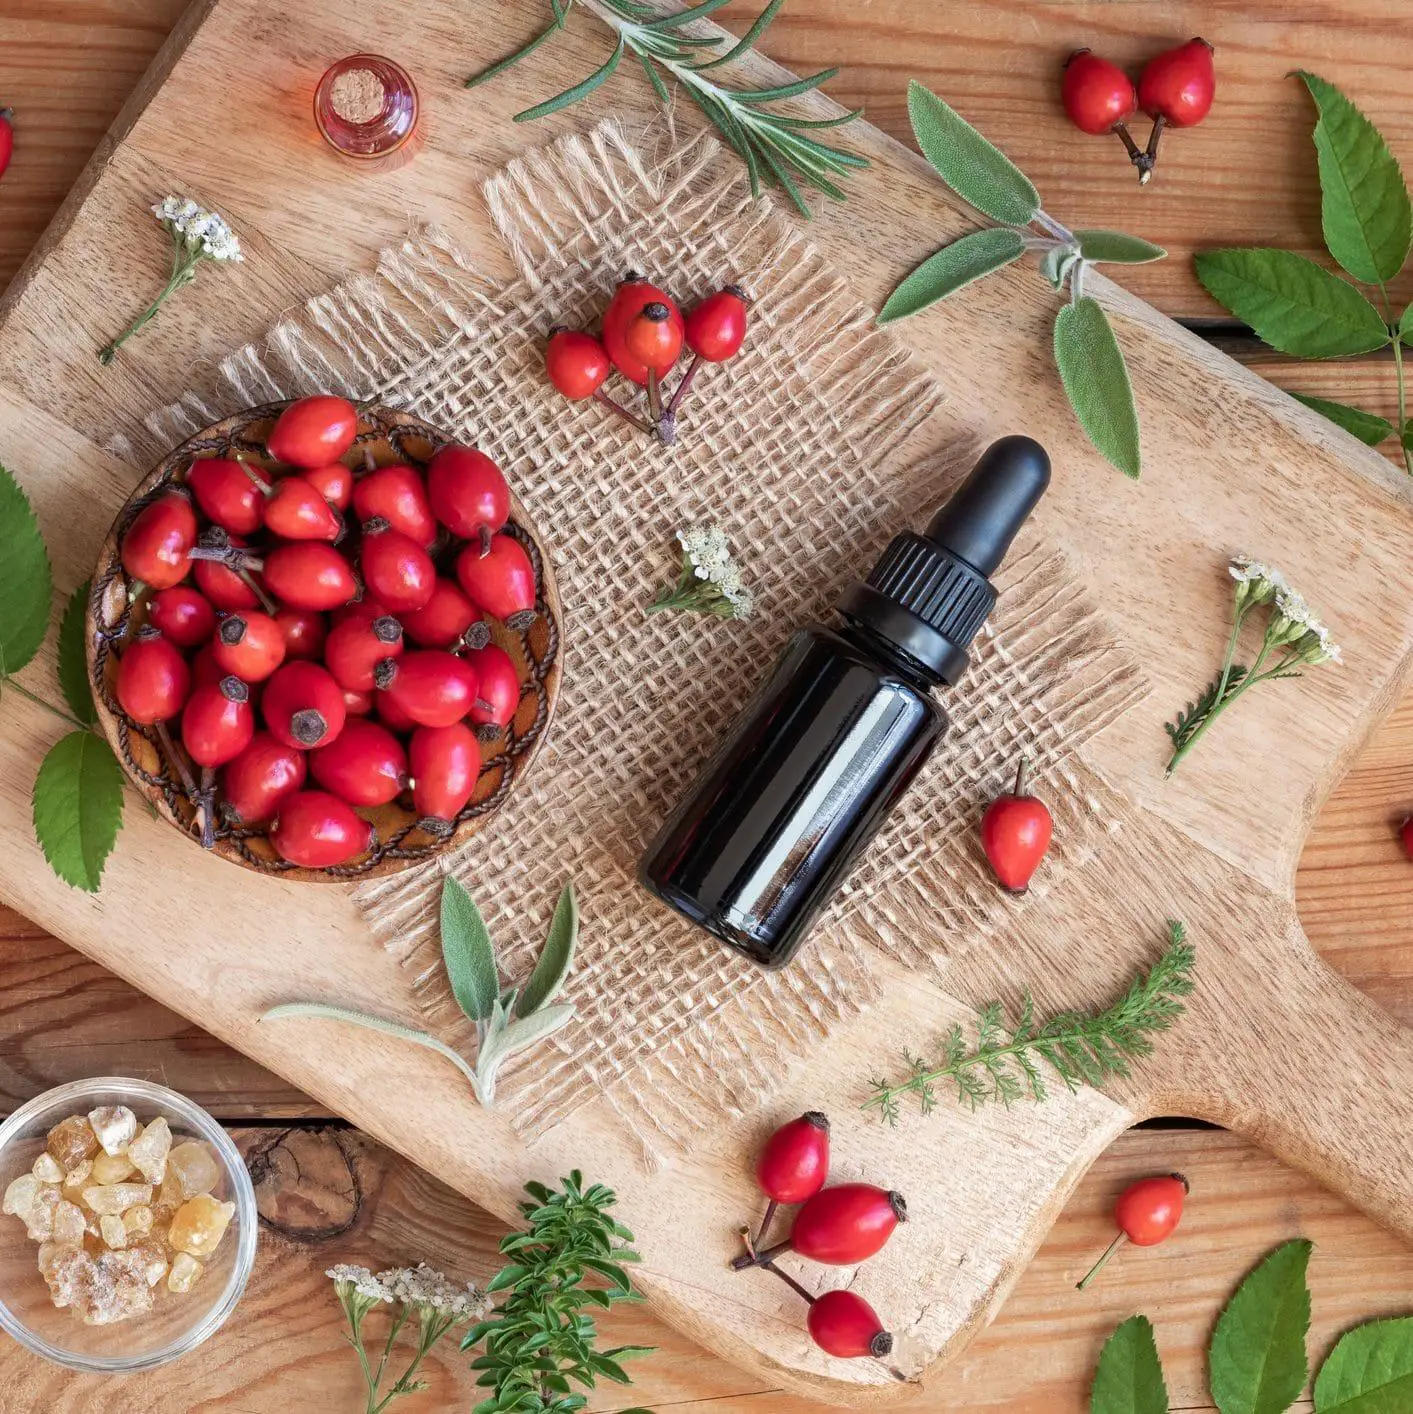 8 Benefits of Rosehip Oil - Why You Should Use Rosehip Oil On Your Face